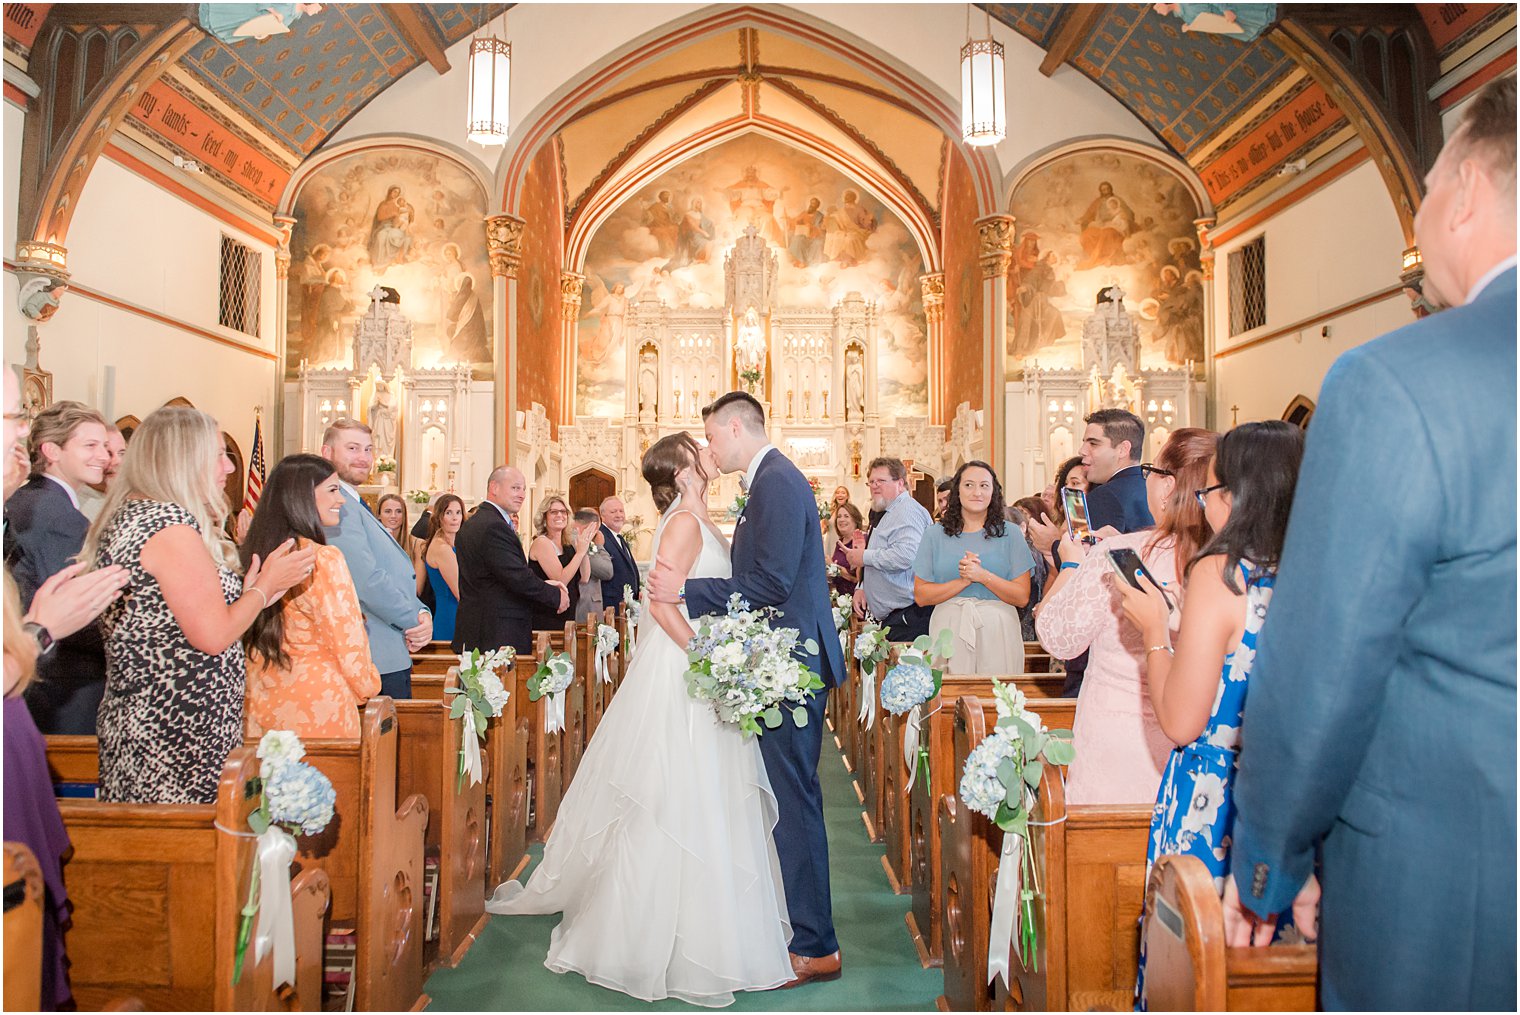 bride and groom kiss in aisle after traditional church wedding ceremony at St. Peter's Church